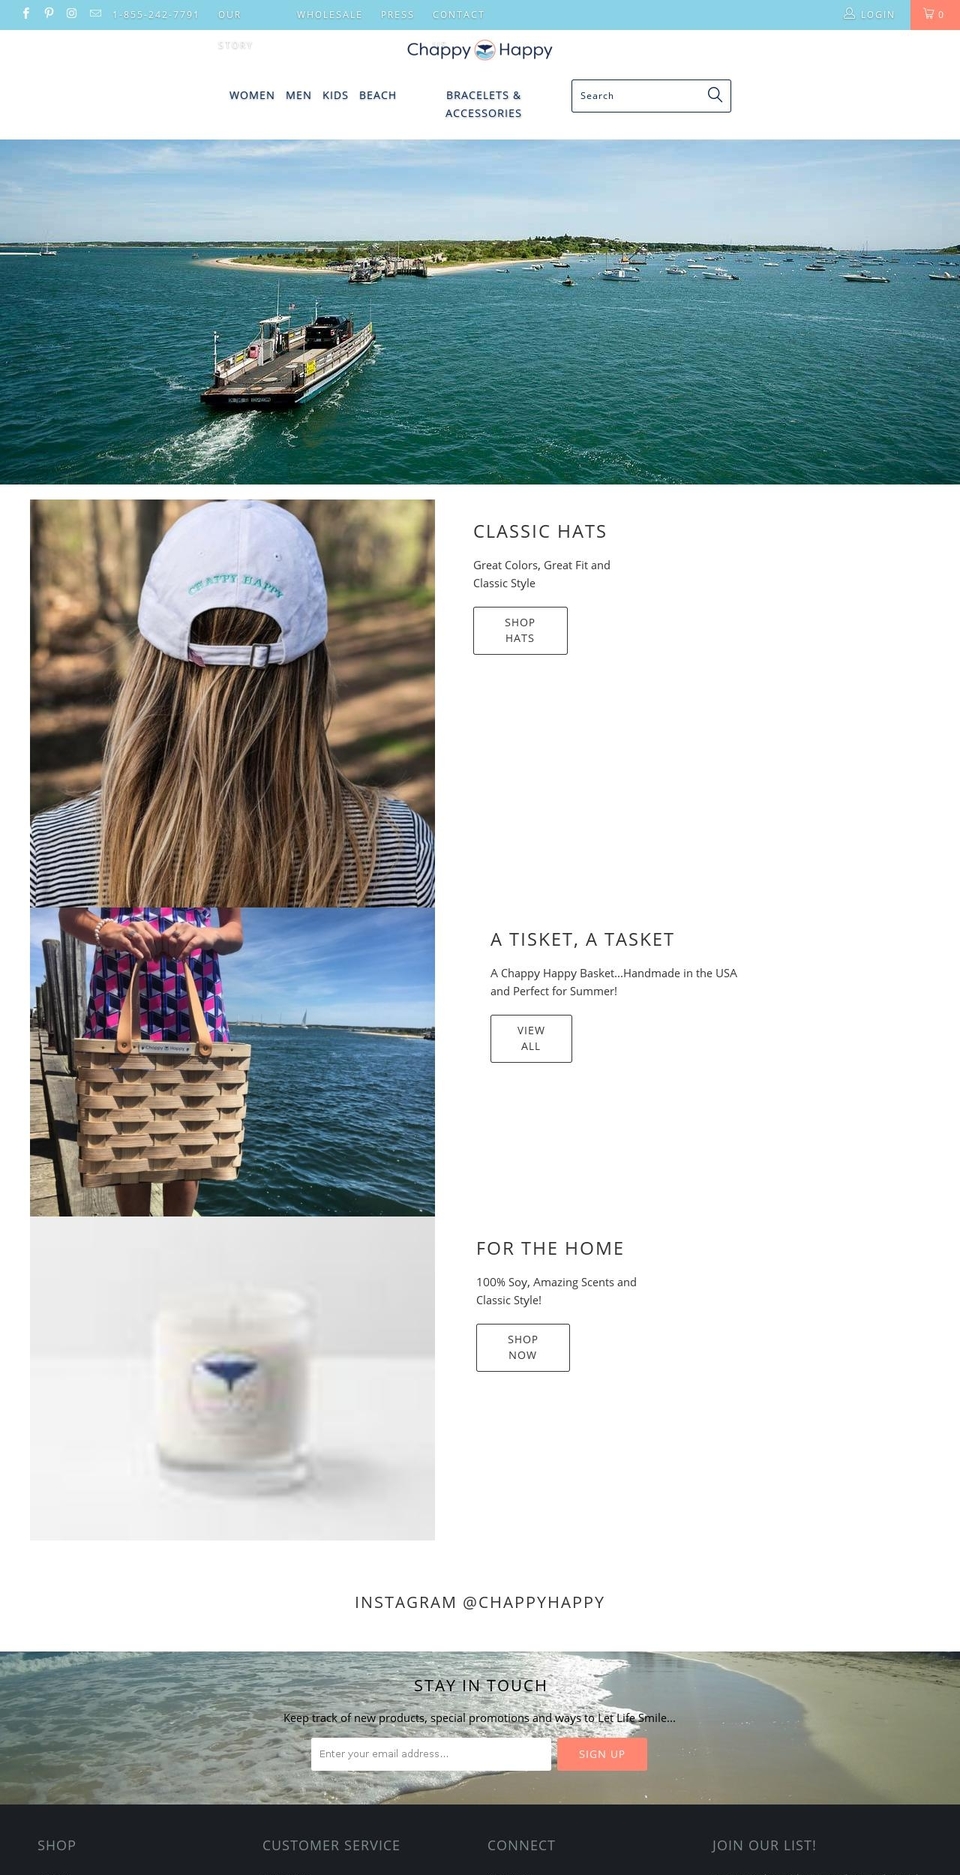 CH-Spring-2018-July-2-2018 Shopify theme site example letlifesmile.com